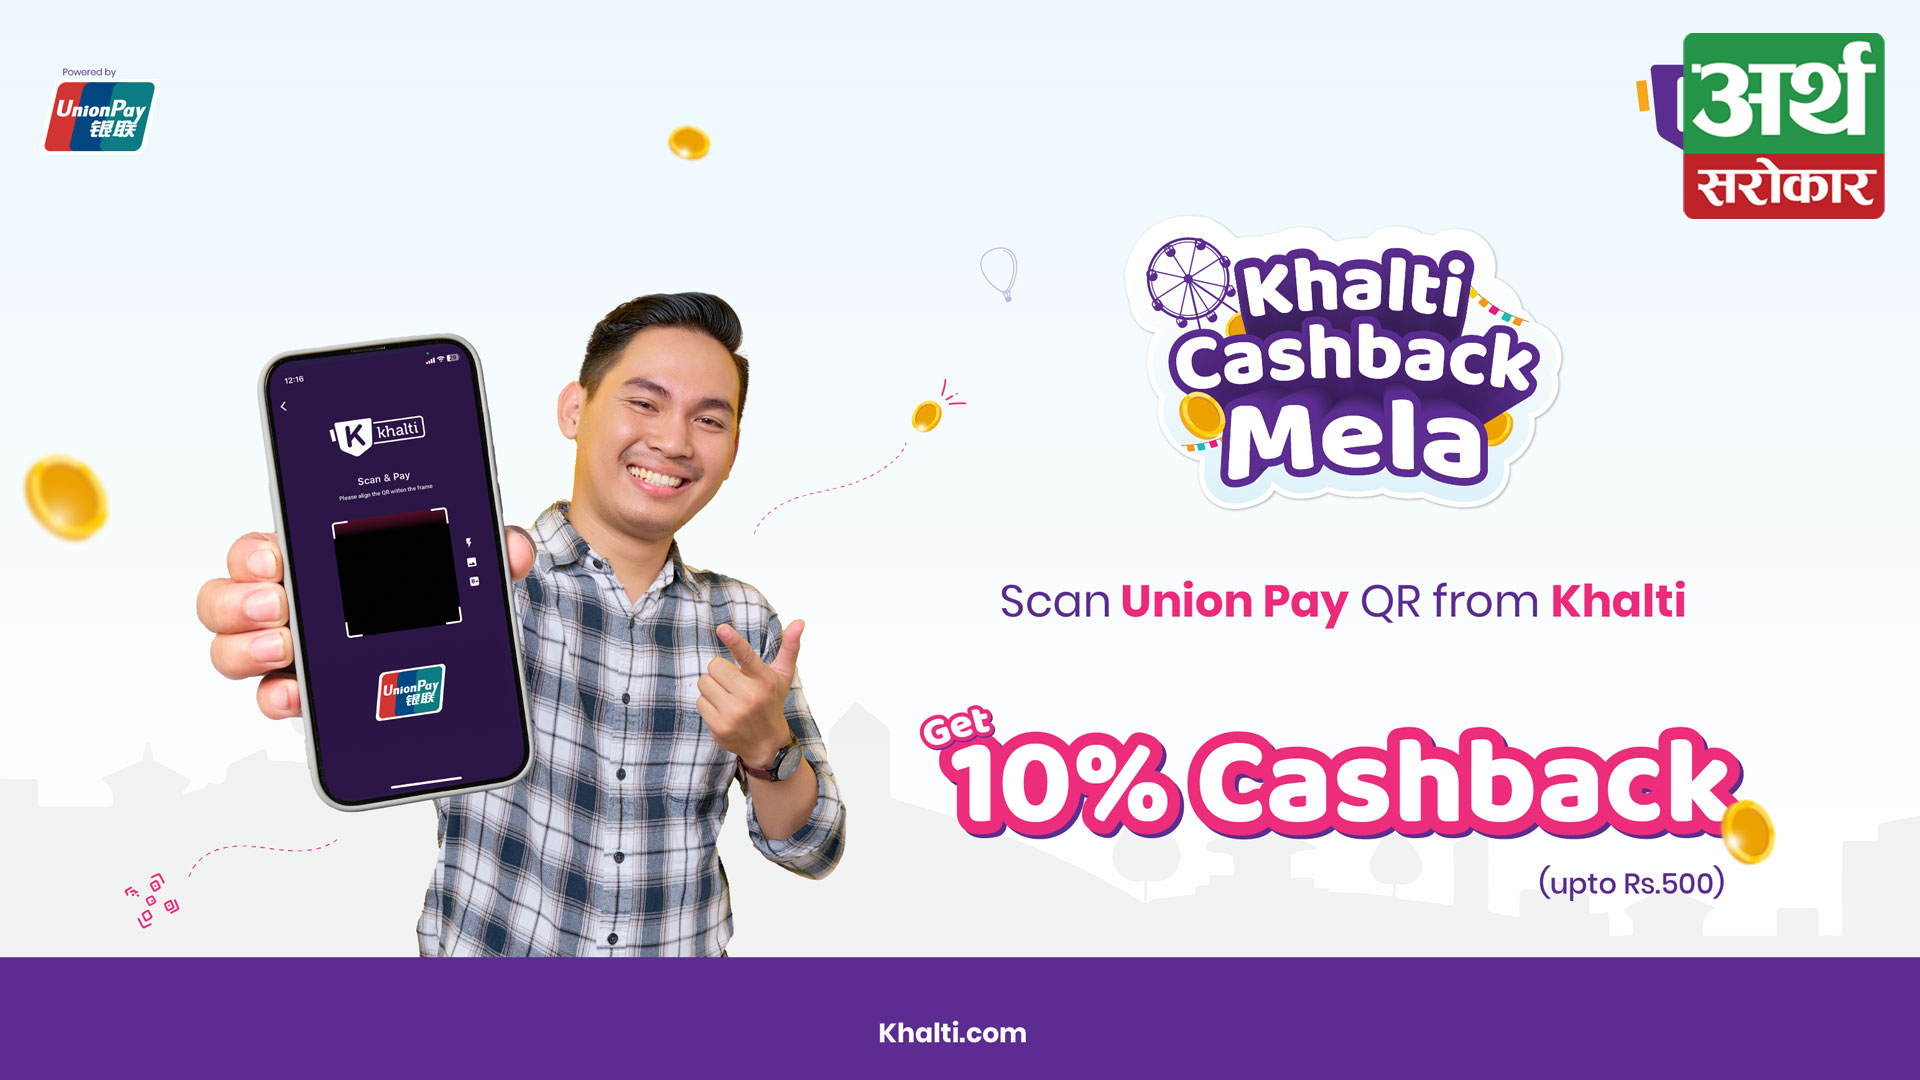 Khalti offers ‘Cashback Mela’ in collaboration with Union Pay, 10% Cashback on Every Scan and Pay